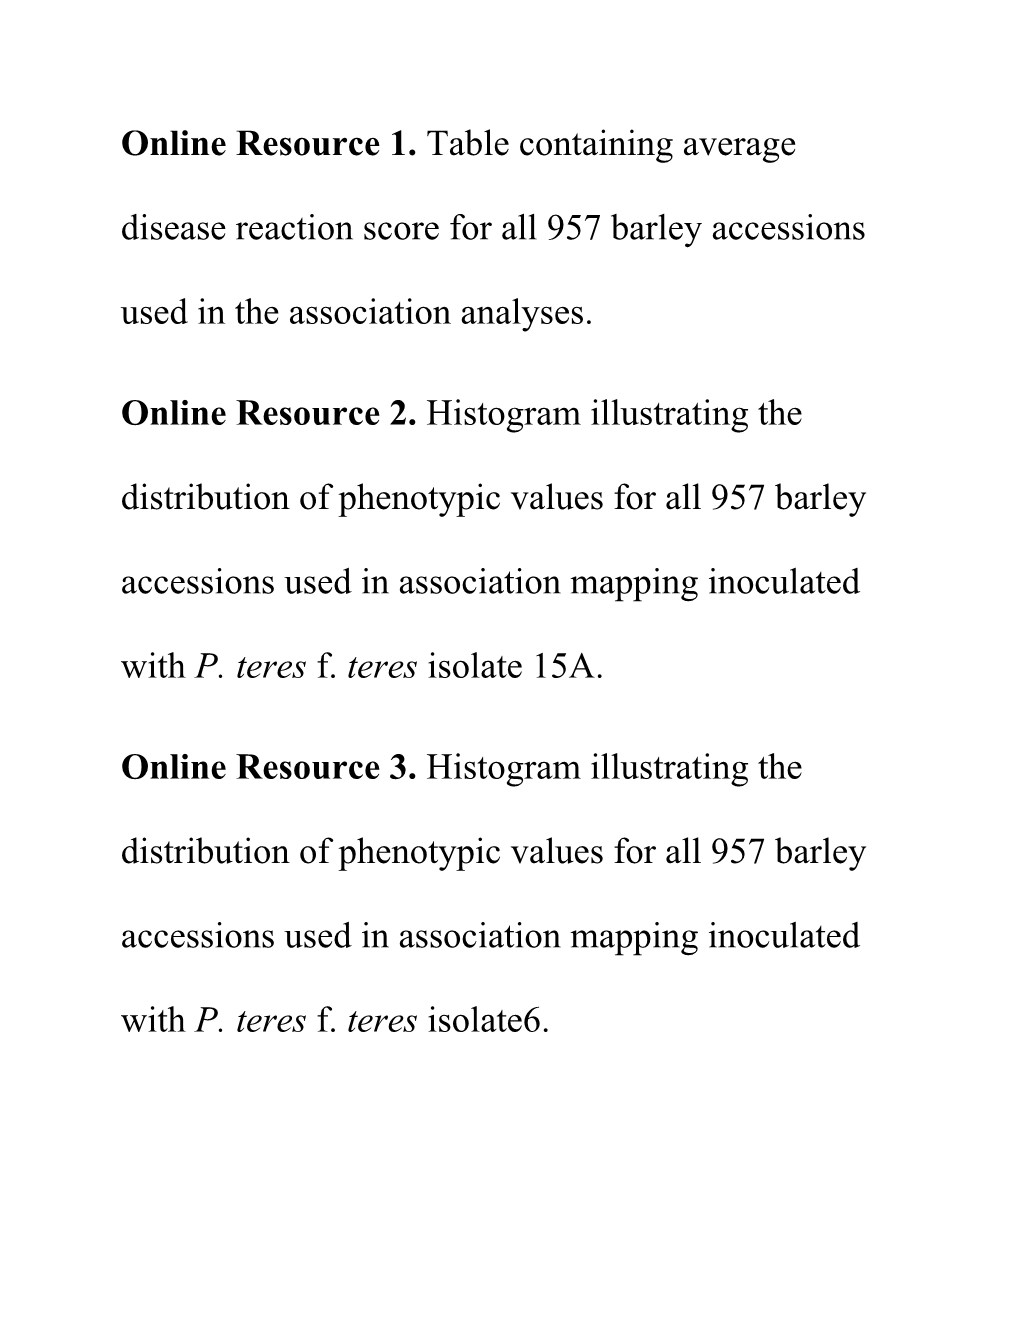 Online Resource 1. Table Containing Average Disease Reaction Score for All 957 Barley